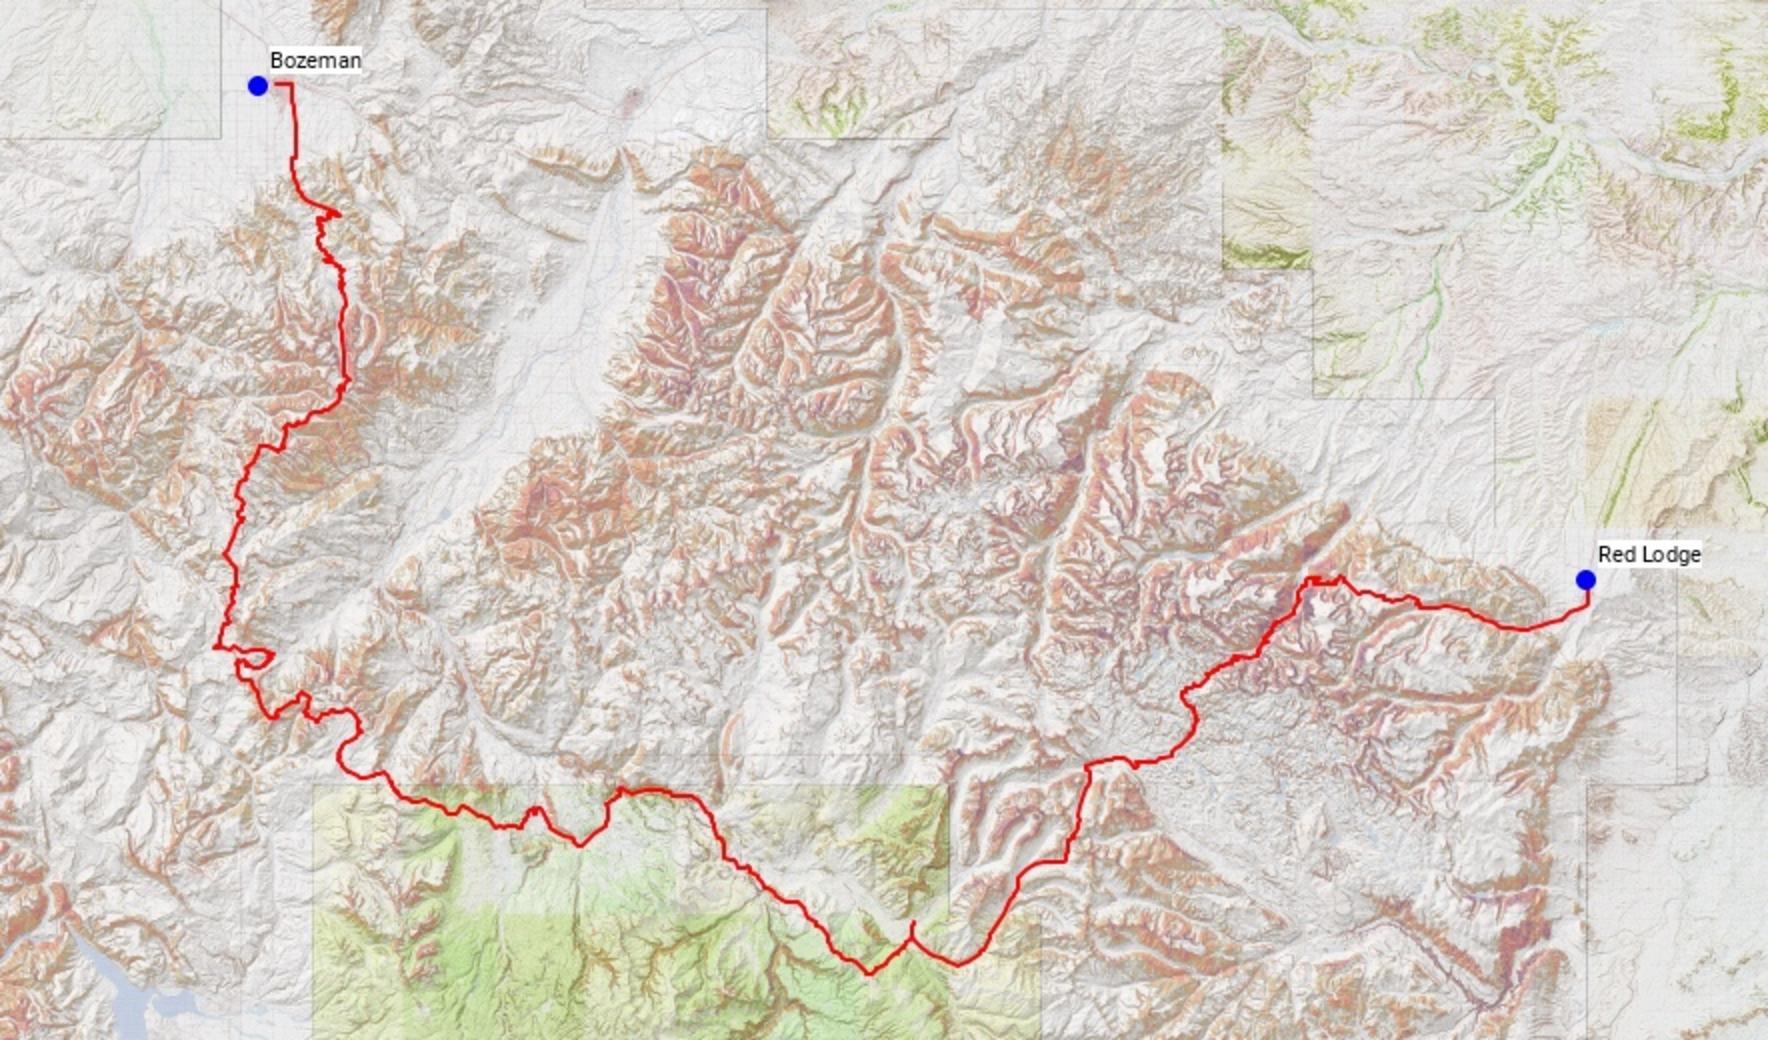 The route that Dave Laufenberg, Anthony Pavkovich and  Zach Altman took in trail running 236 miles from Bozeman, Montana to Red Lodge.  Map courtesy CommonGroundMT